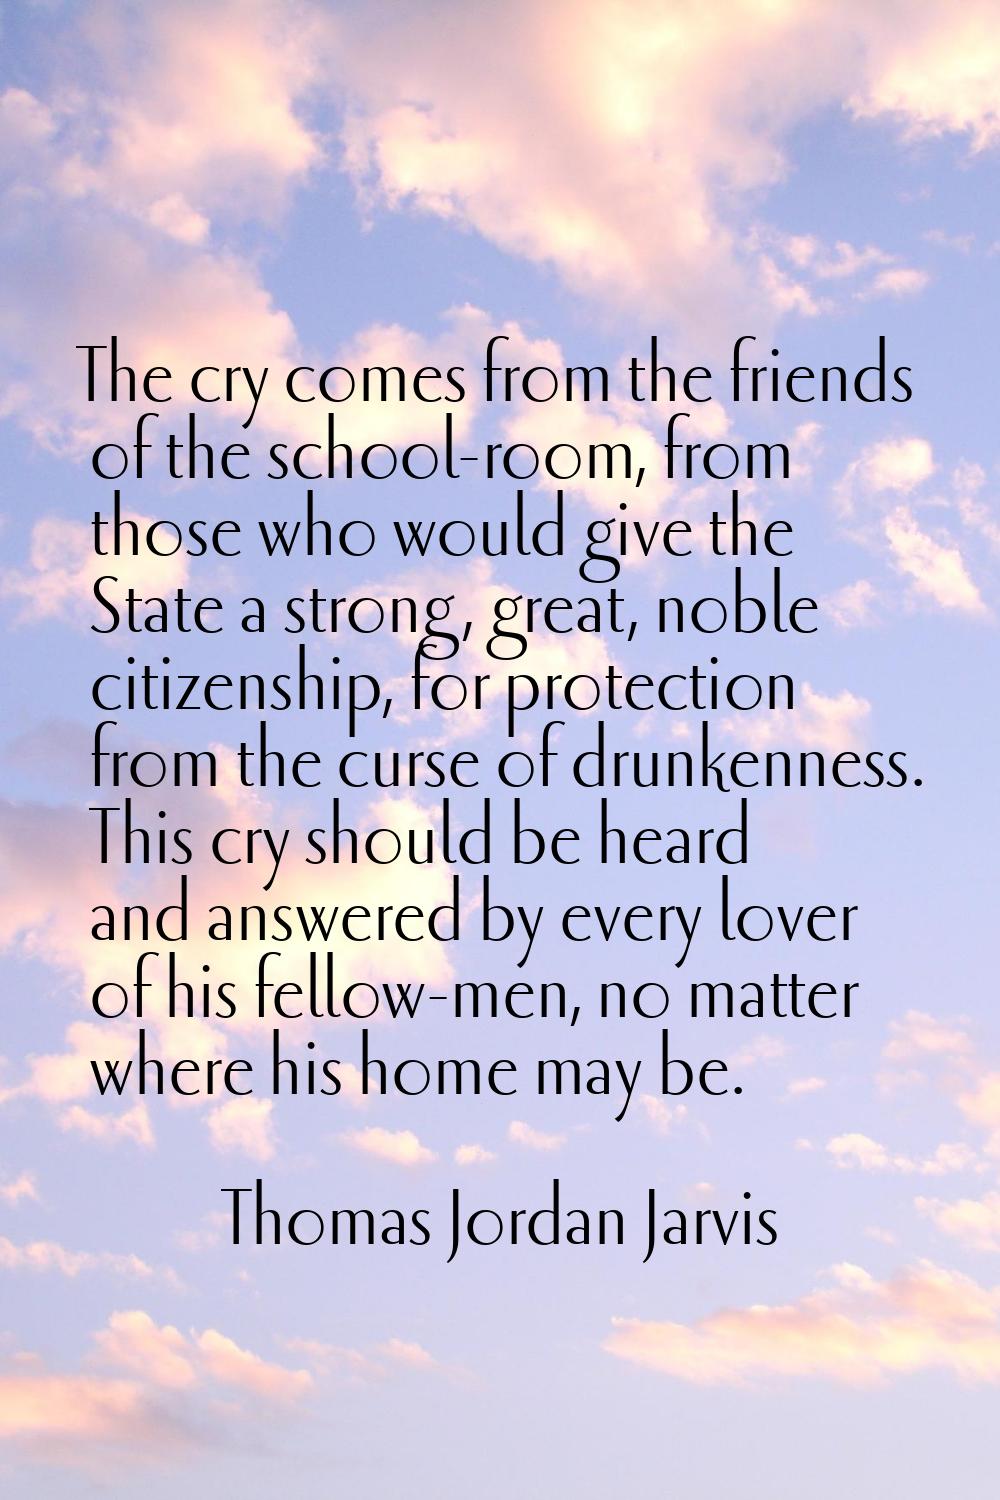 The cry comes from the friends of the school-room, from those who would give the State a strong, gr